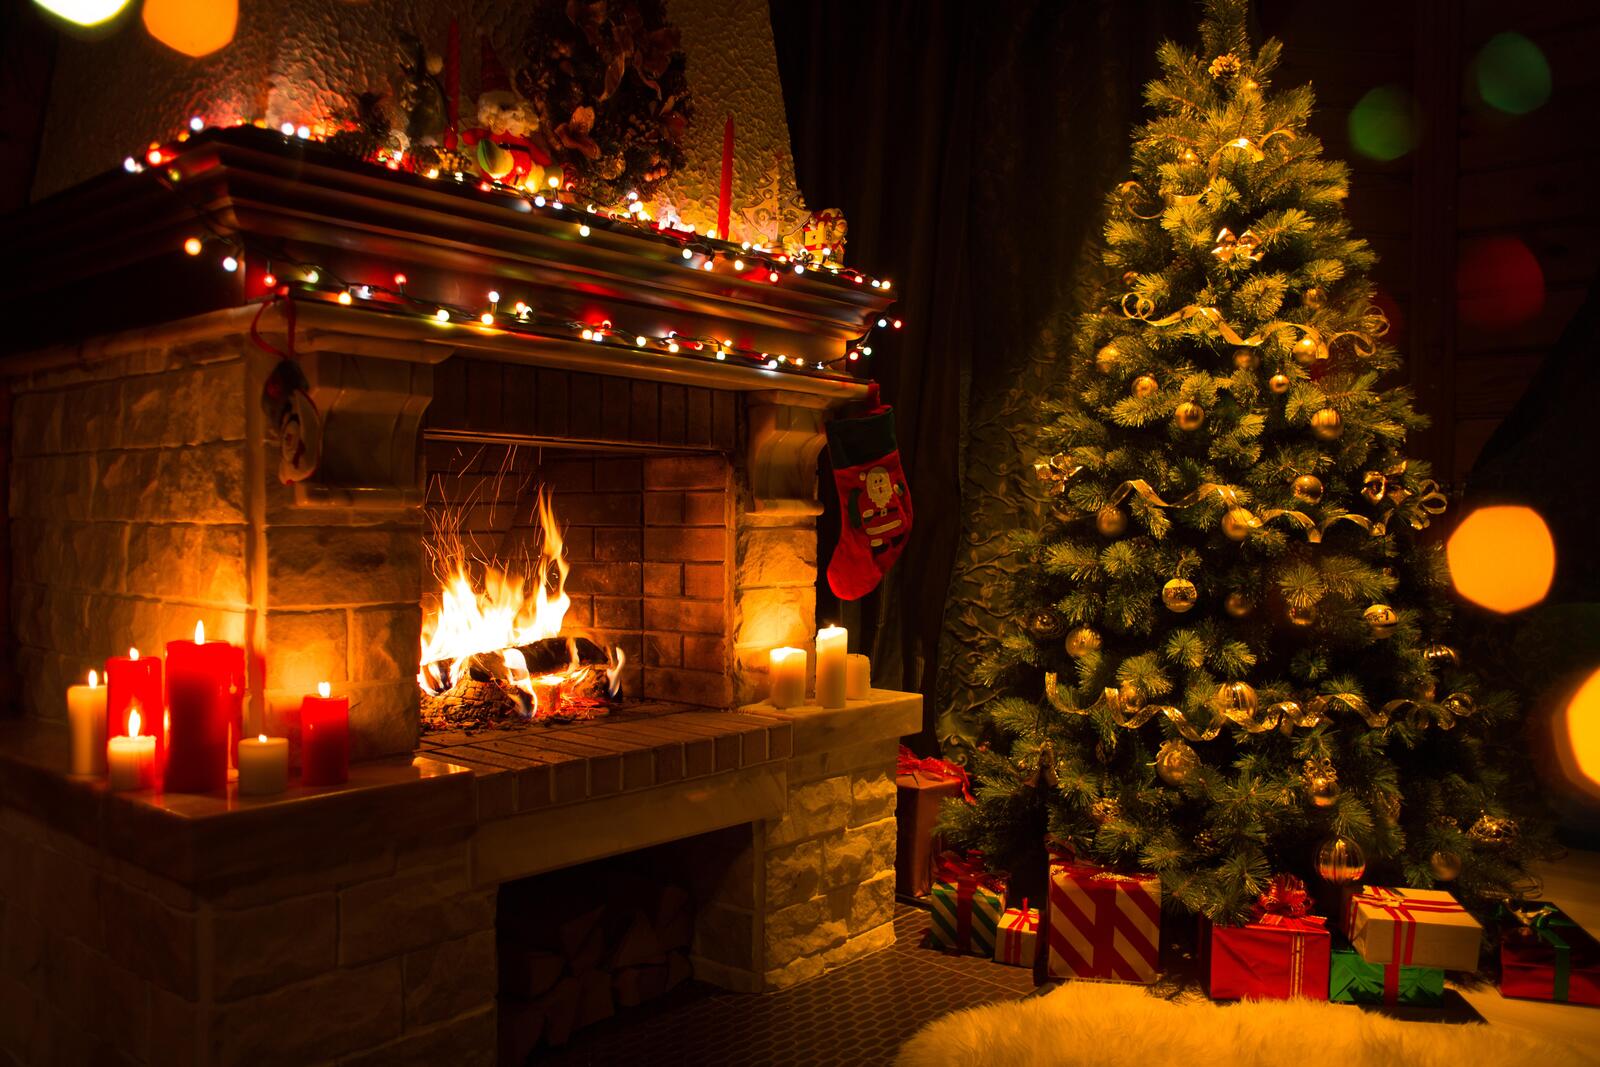 Wallpapers gifts New Year tree in the interior fireplace on the desktop